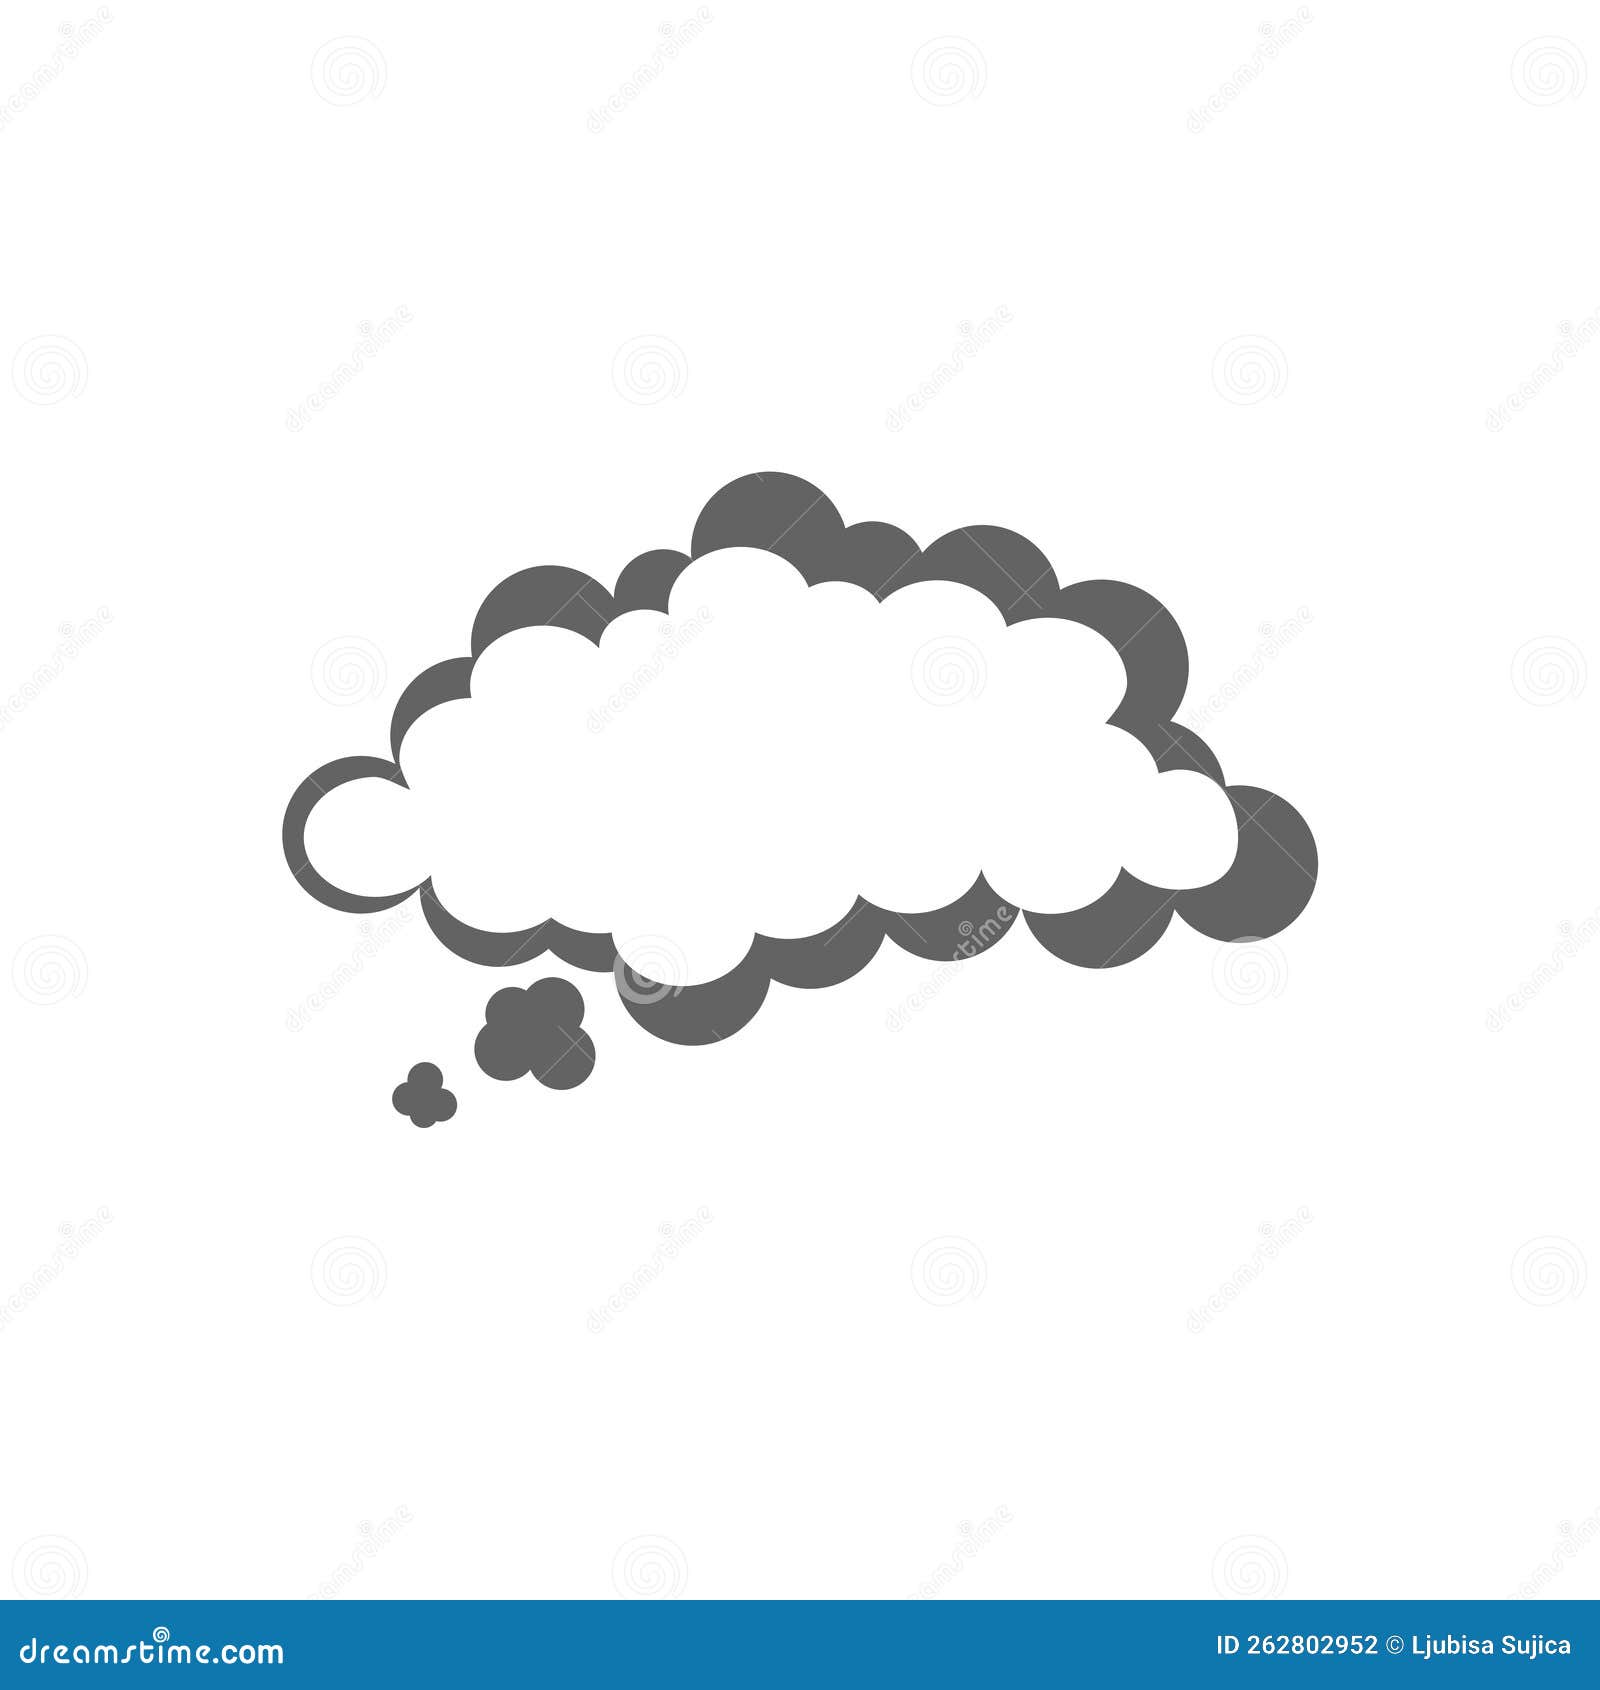 Thought Cloud Logo. Thinking Balloon Icon Isolated on White Background  Stock Vector - Illustration of community, element: 262802952